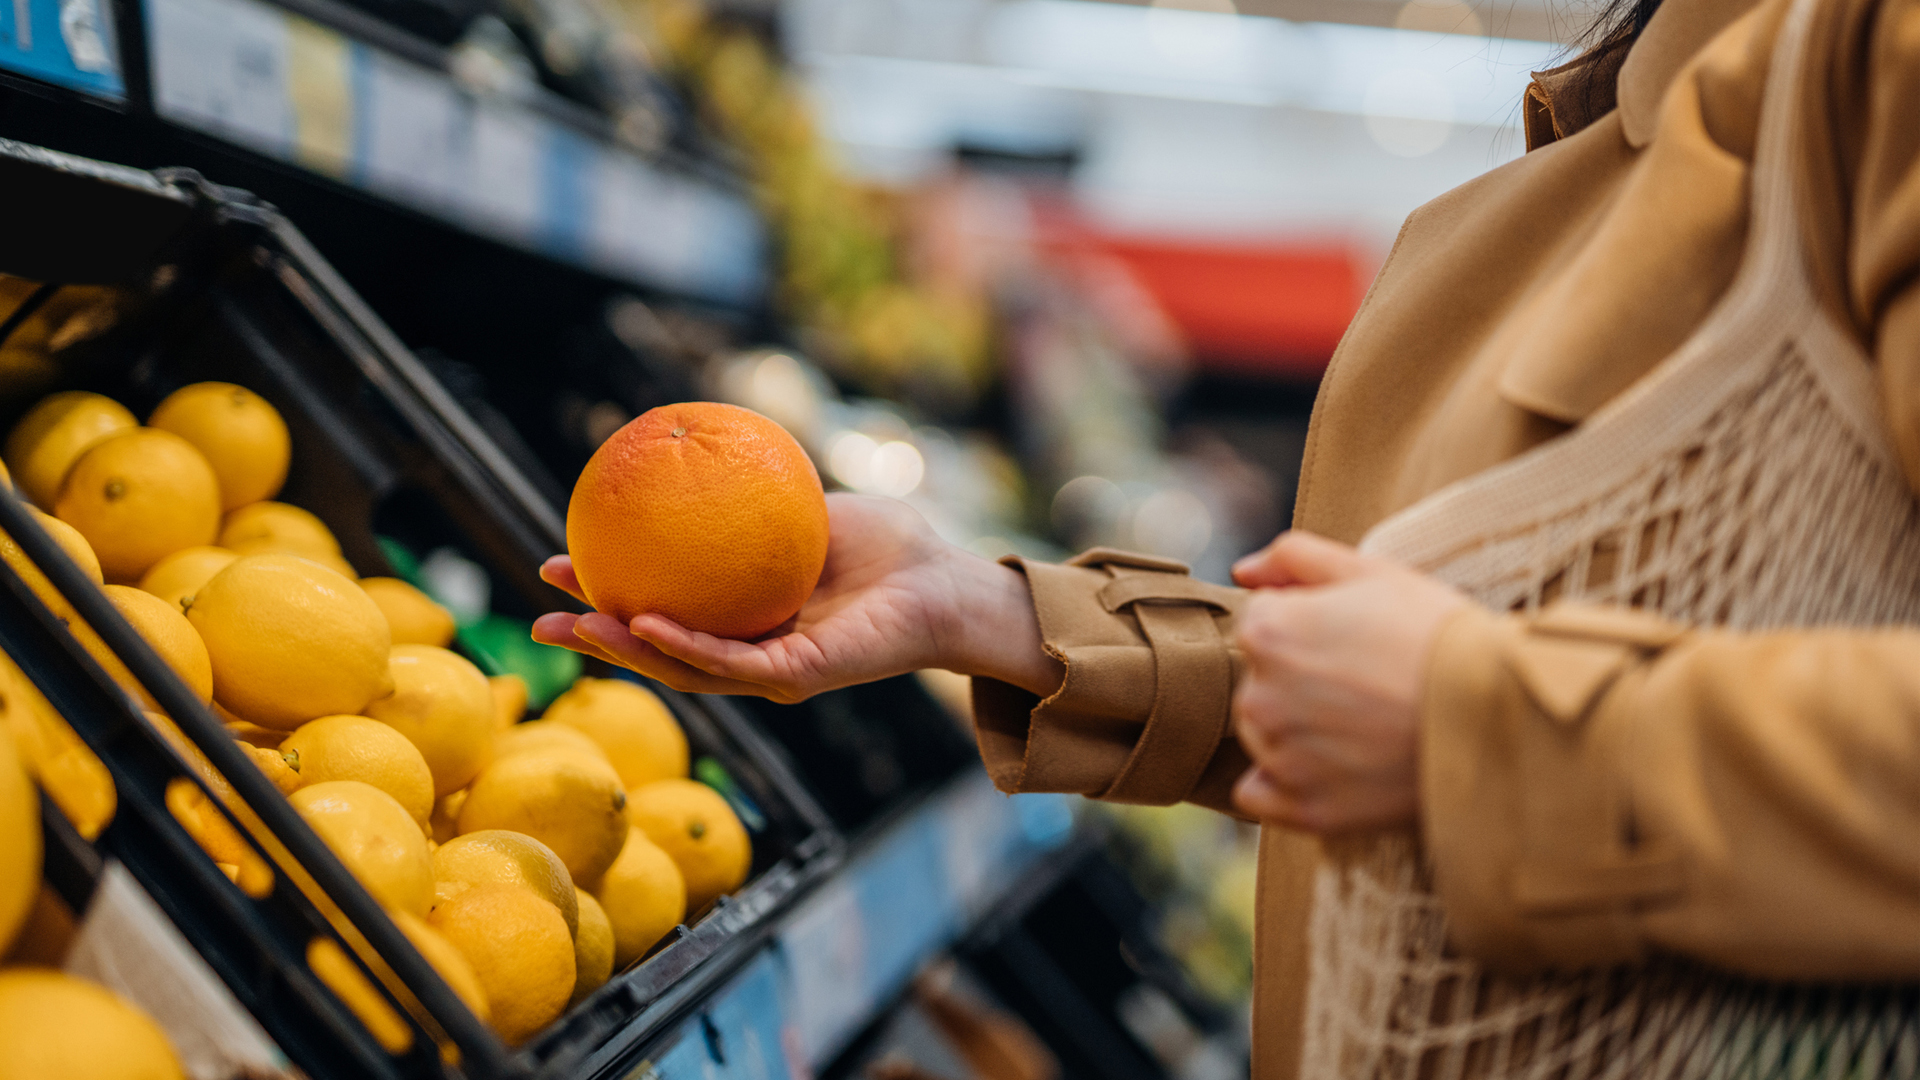 a woman picks up an orange at the grocery store